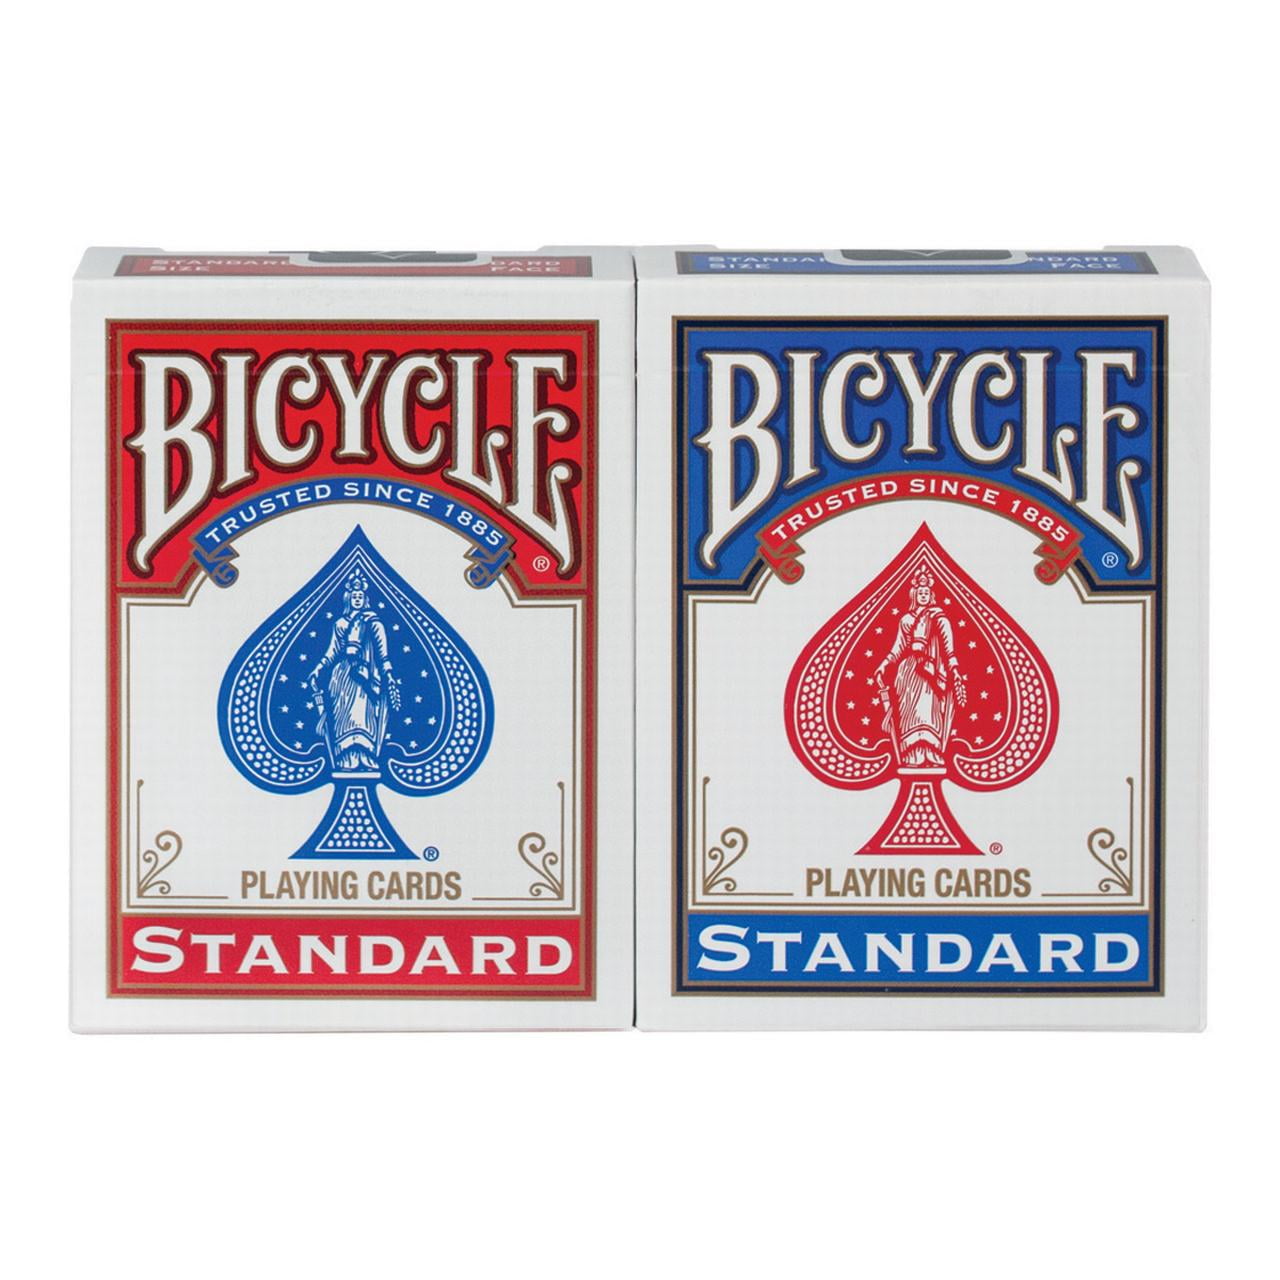 Bicycle 2 Decks Standard Poker and 5 Dice Set BRAND NEW CARDS 